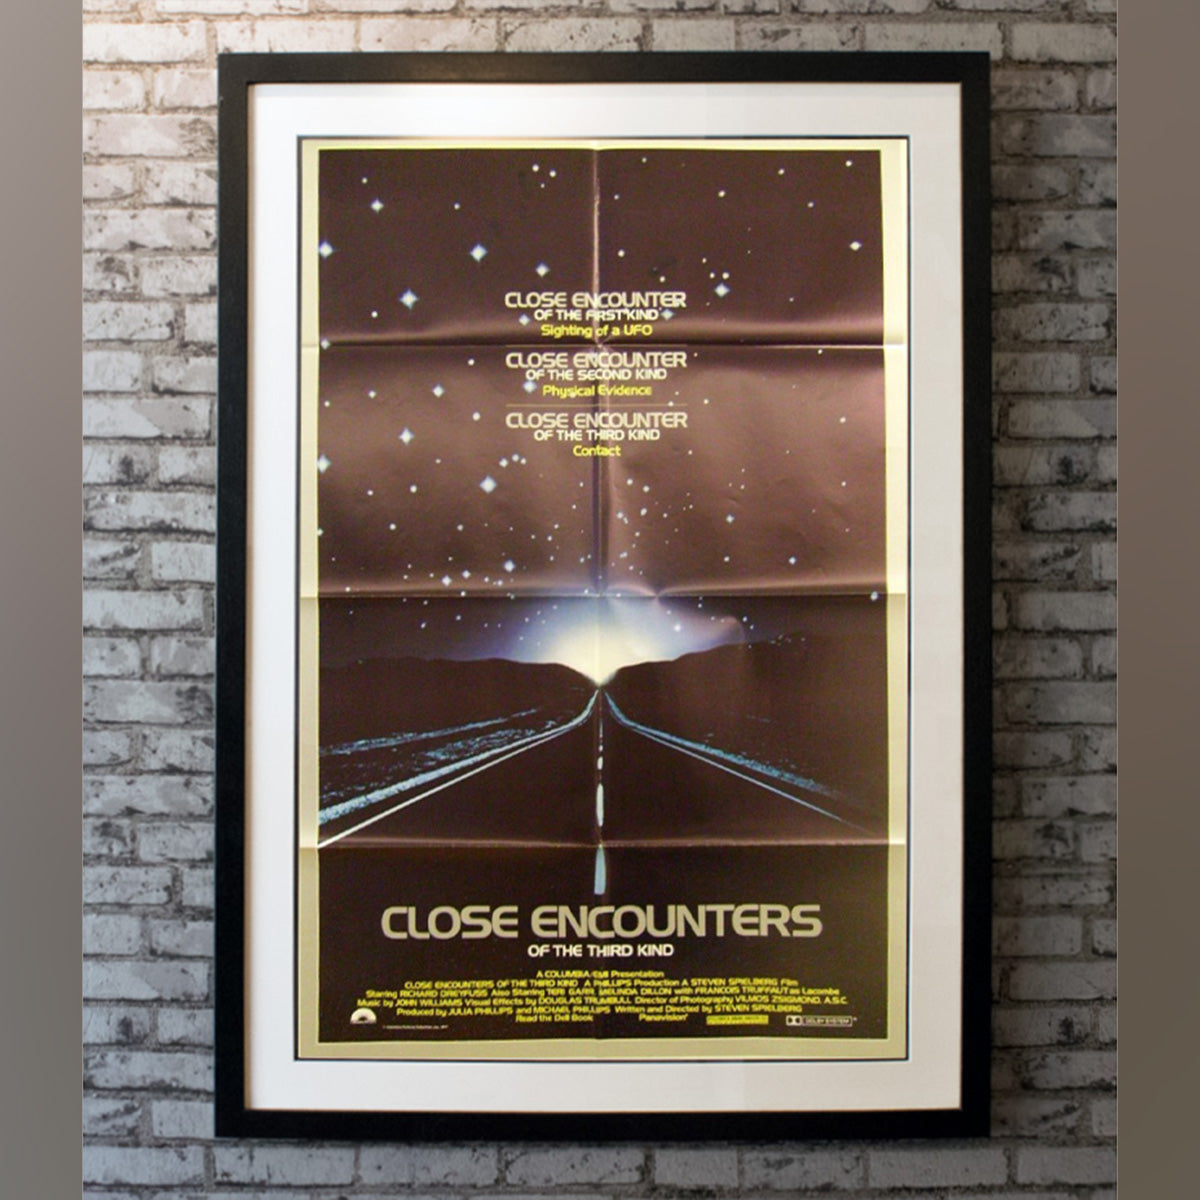 Original Movie Poster of Close Encounters Of The Third Kind (1977)